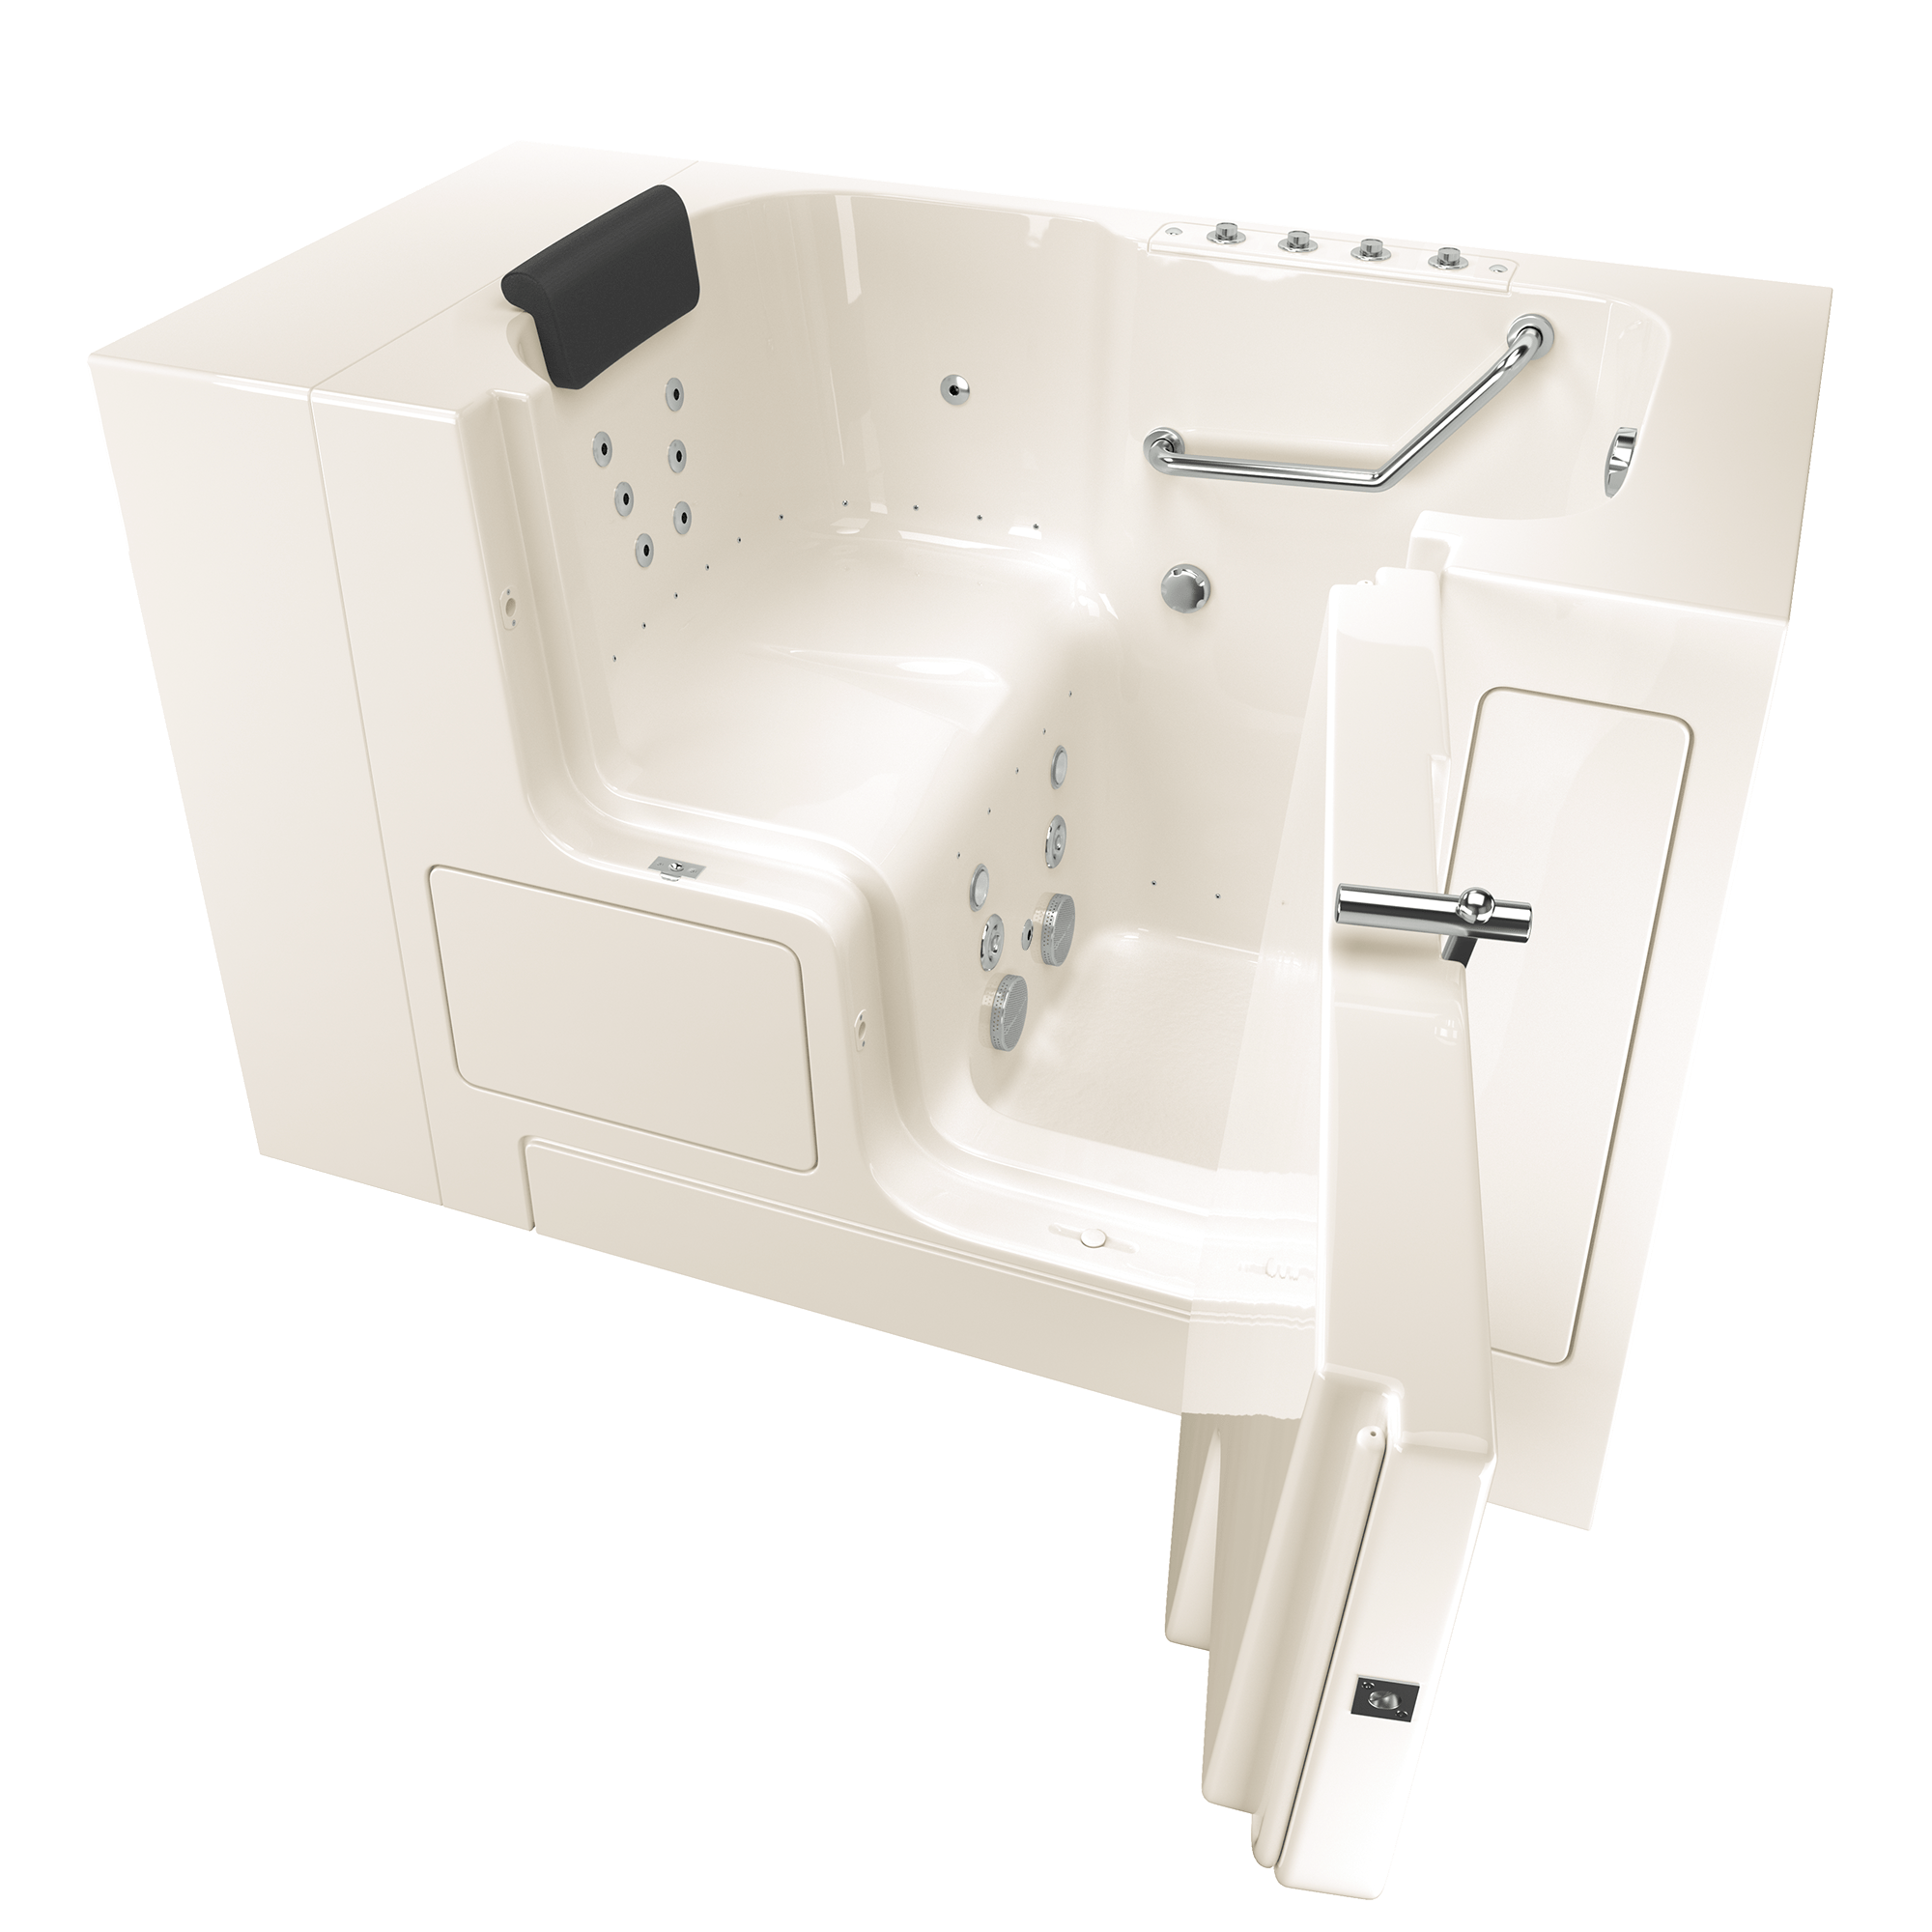 Gelcoat Premium Series 32 x 52 -Inch Walk-in Tub With Combination Air Spa and Whirlpool Systems - Right-Hand Drain